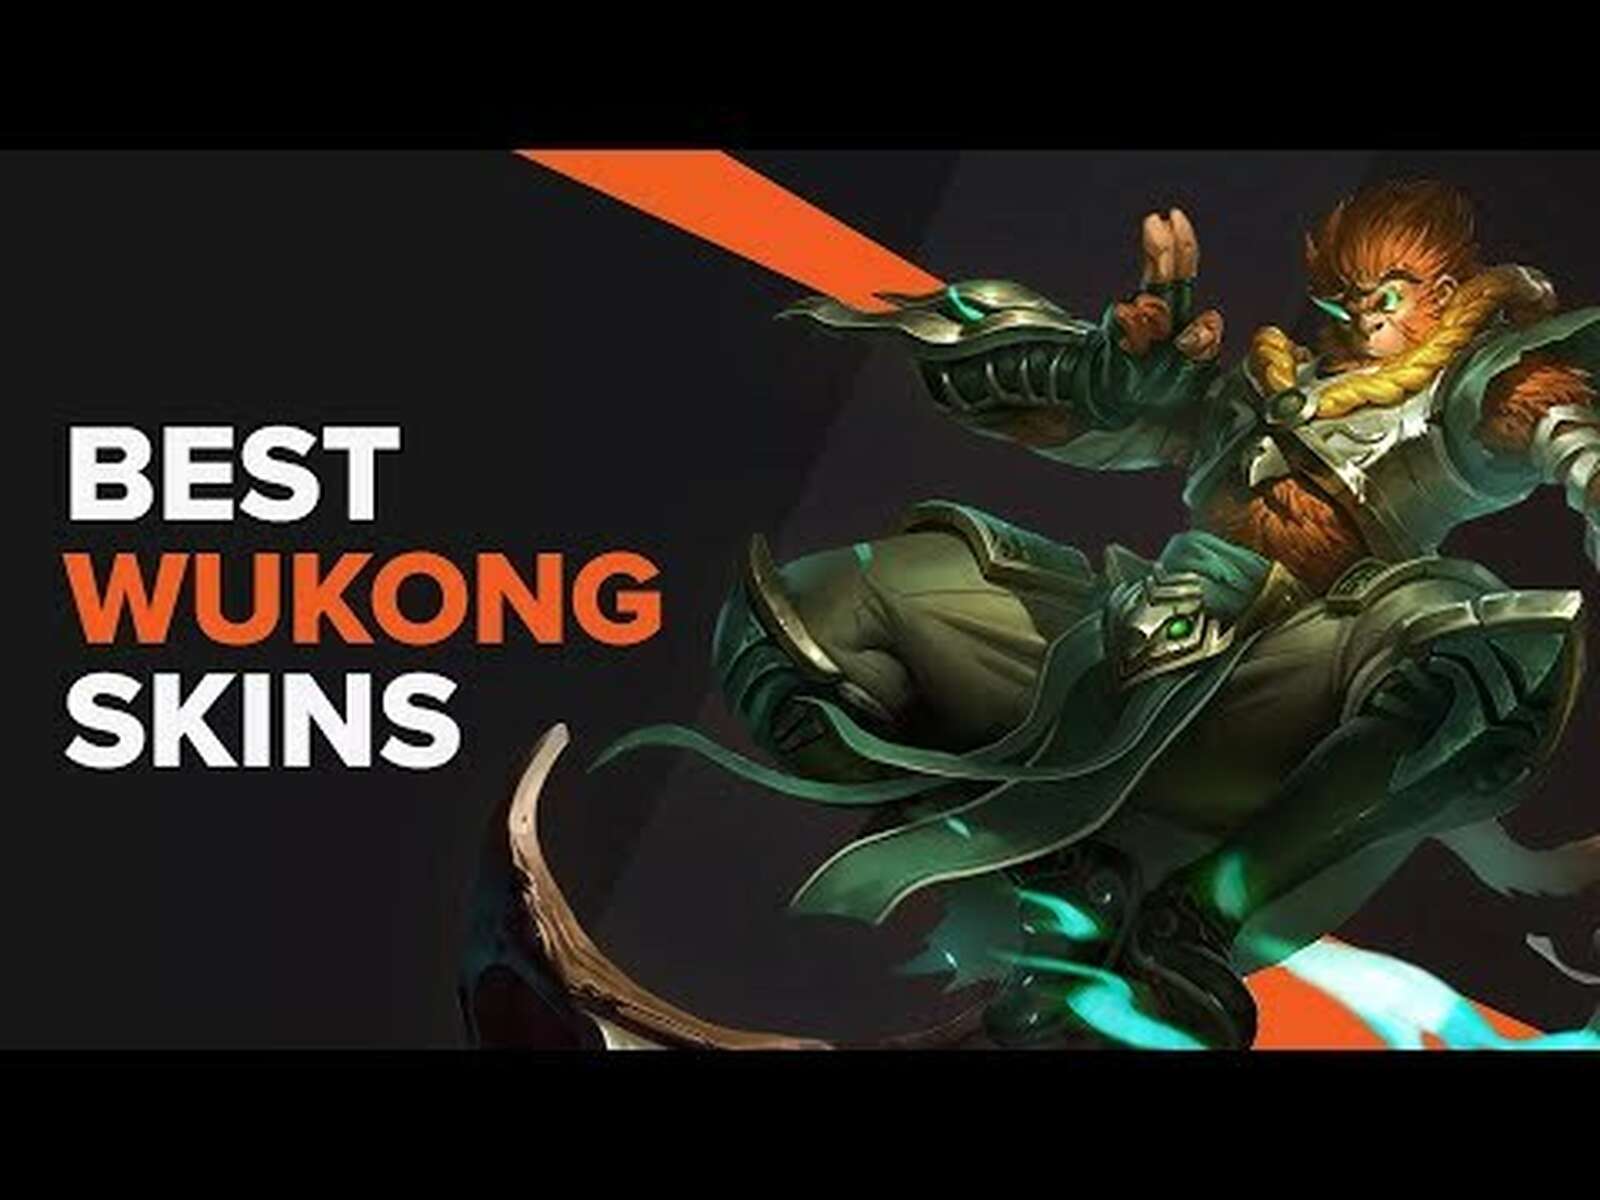 The Best Wukong Skins in LoL